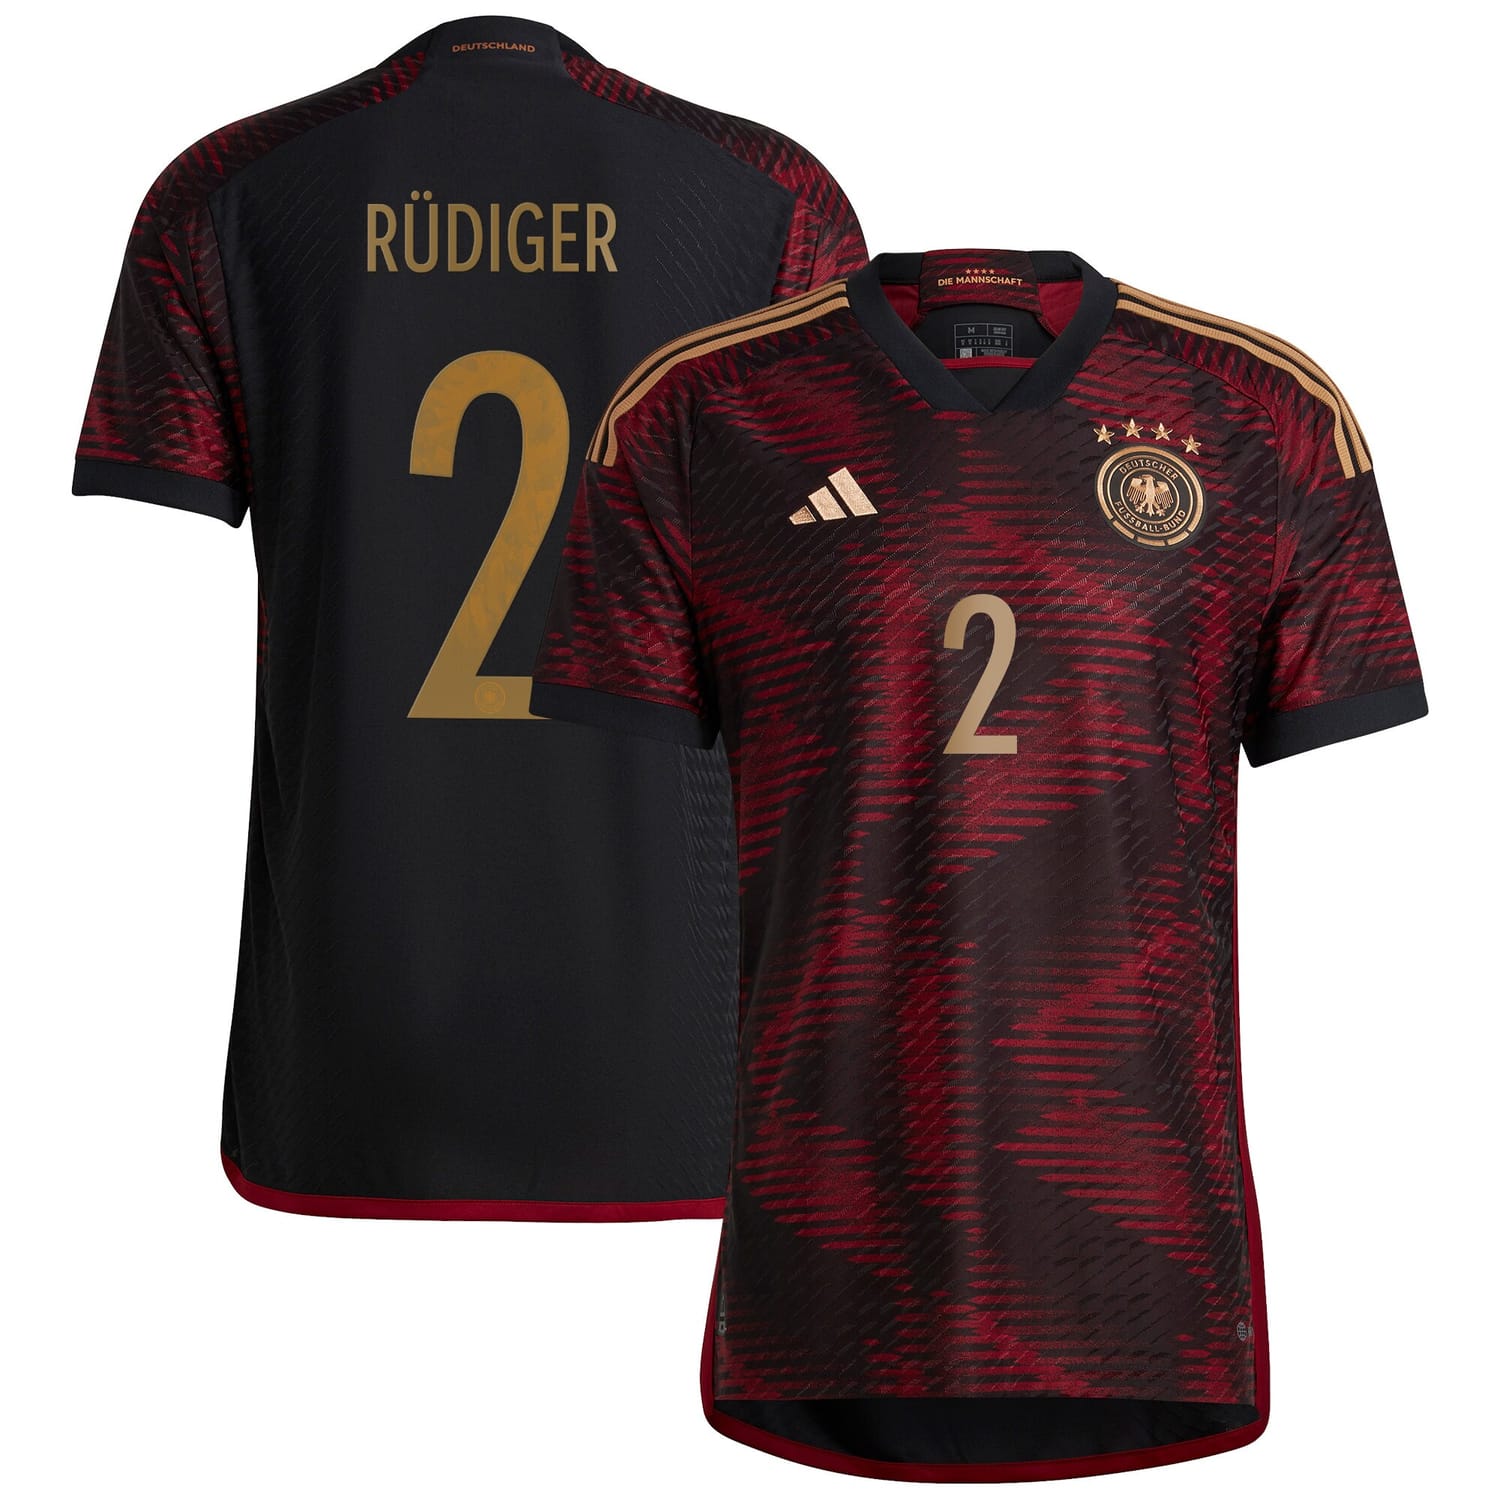 Germany National Team Away Authentic Jersey Shirt player Antonio Rüdiger 2 printing for Men